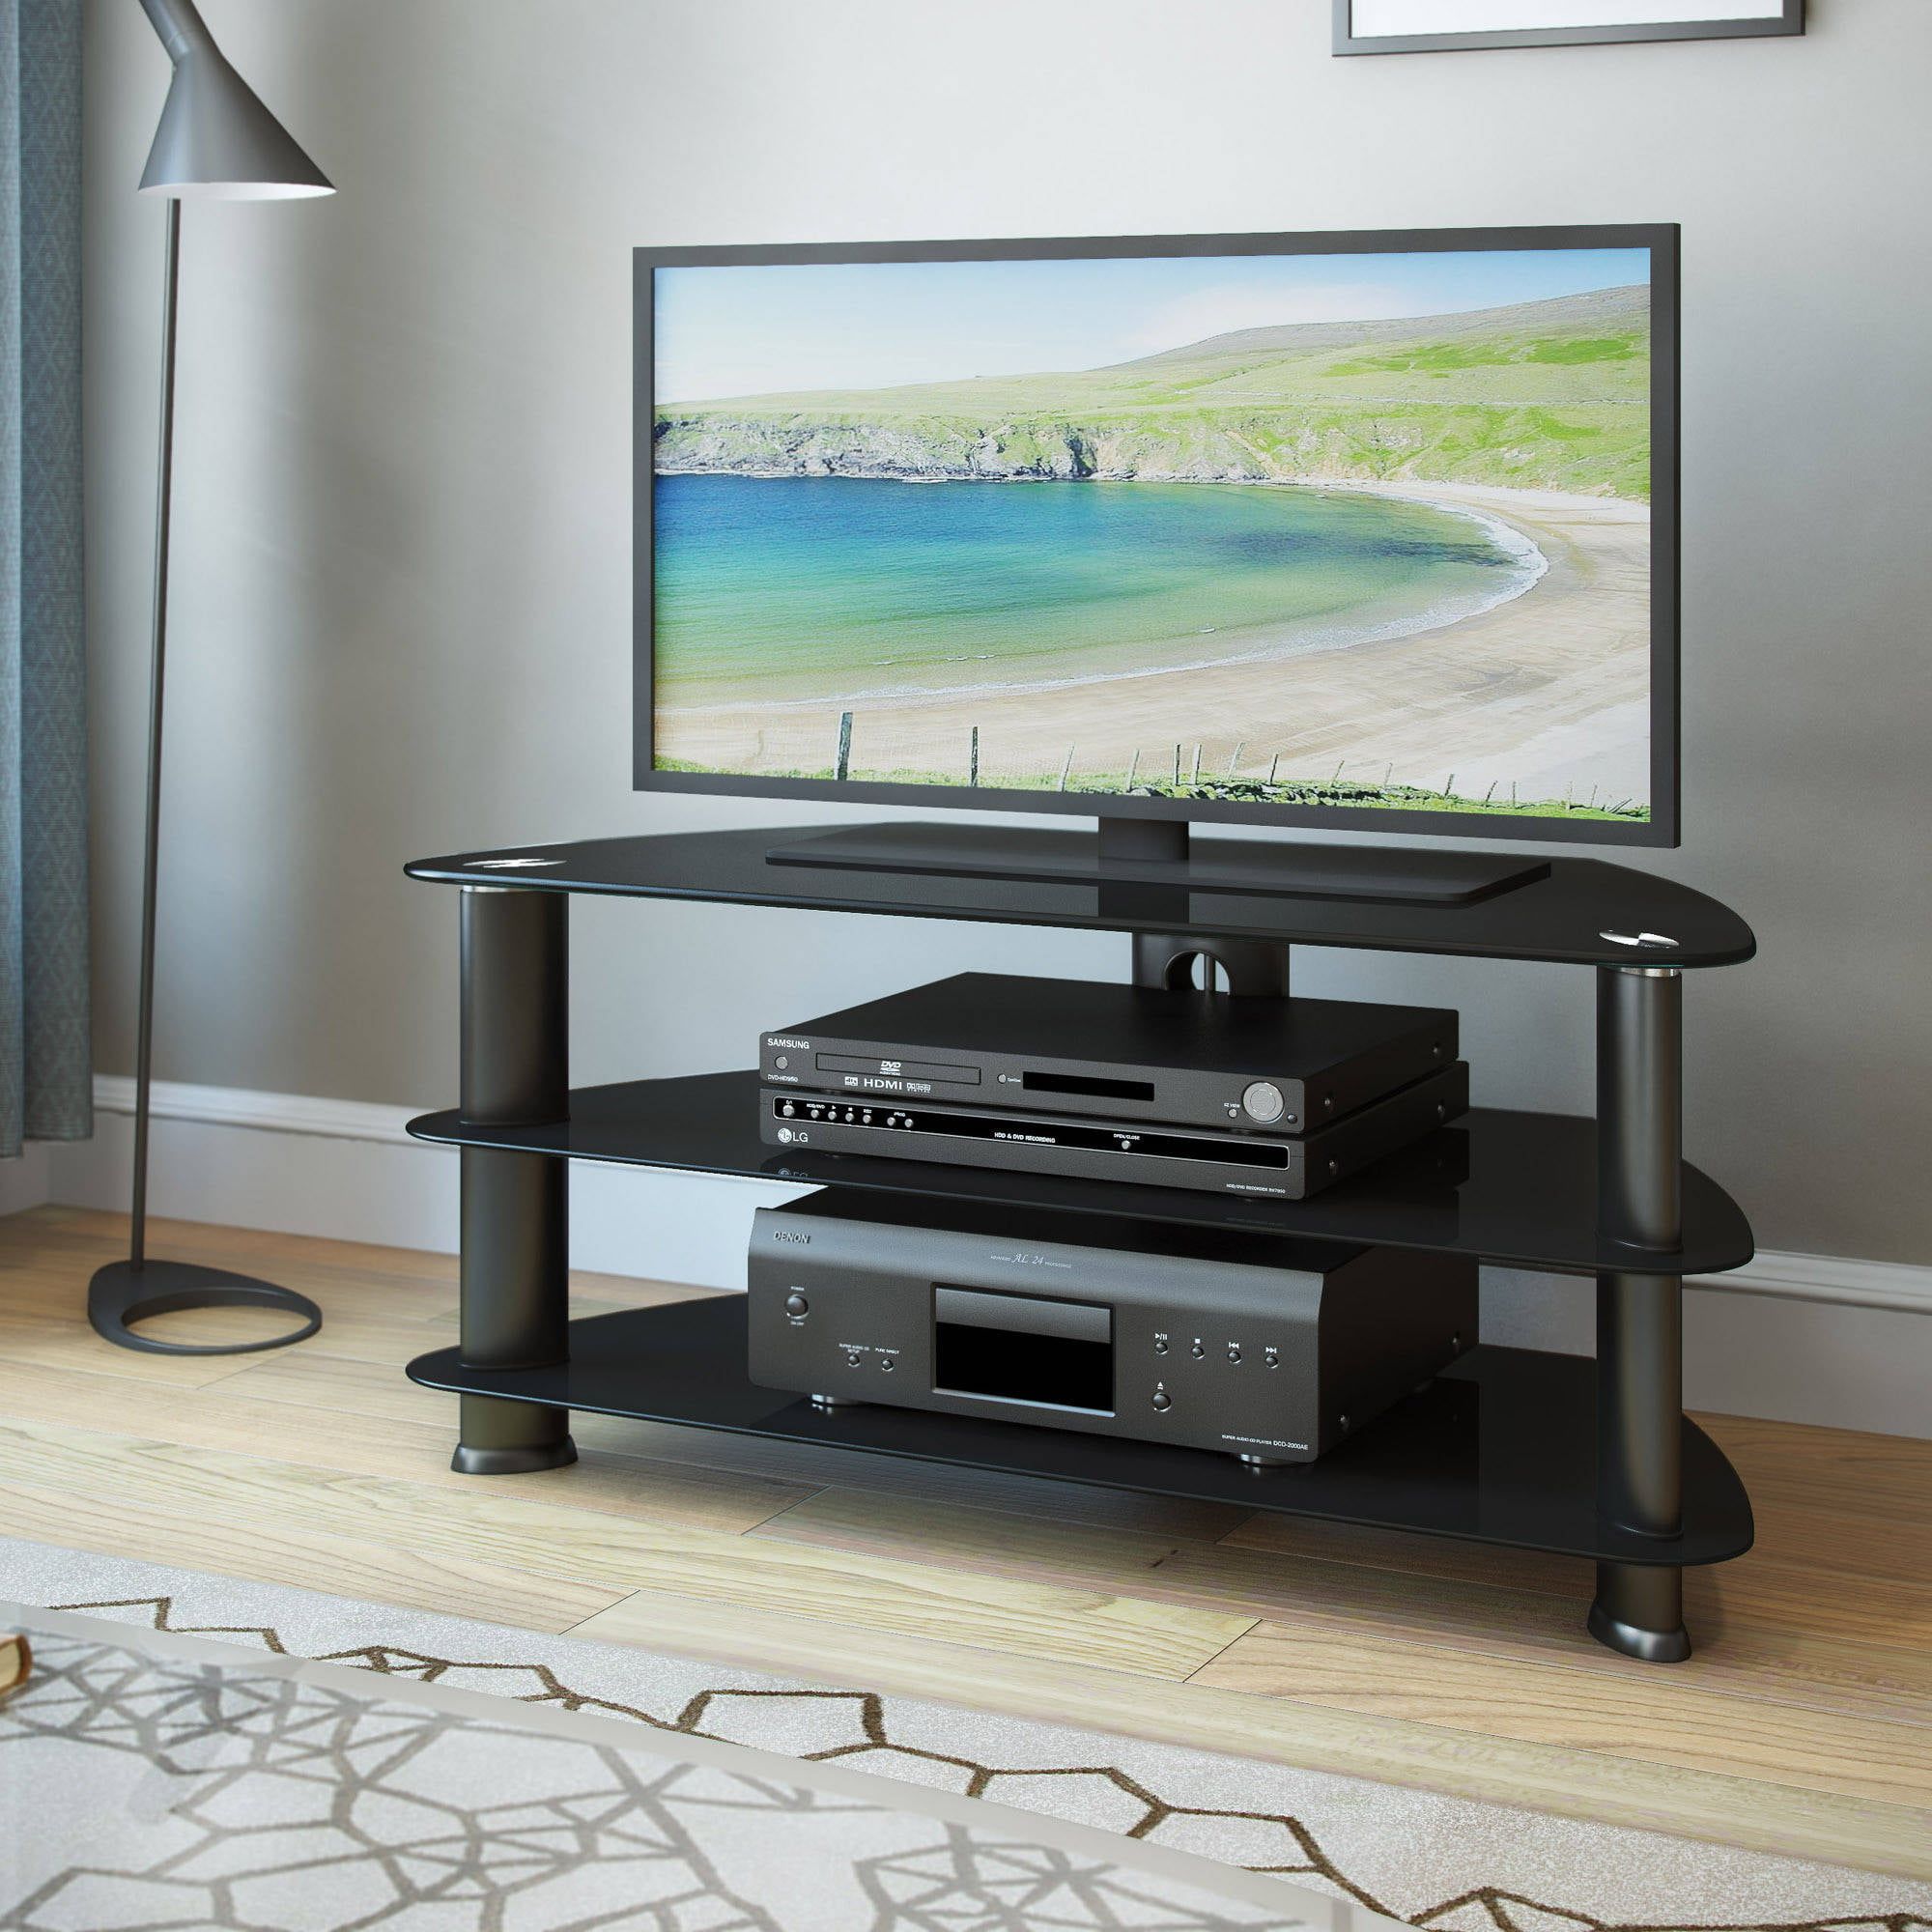 Laguna Satin Black Corner Tv Stand For Tvs Up To 50" – Walmart Pertaining To Glass Shelves Tv Stands (Gallery 20 of 20)